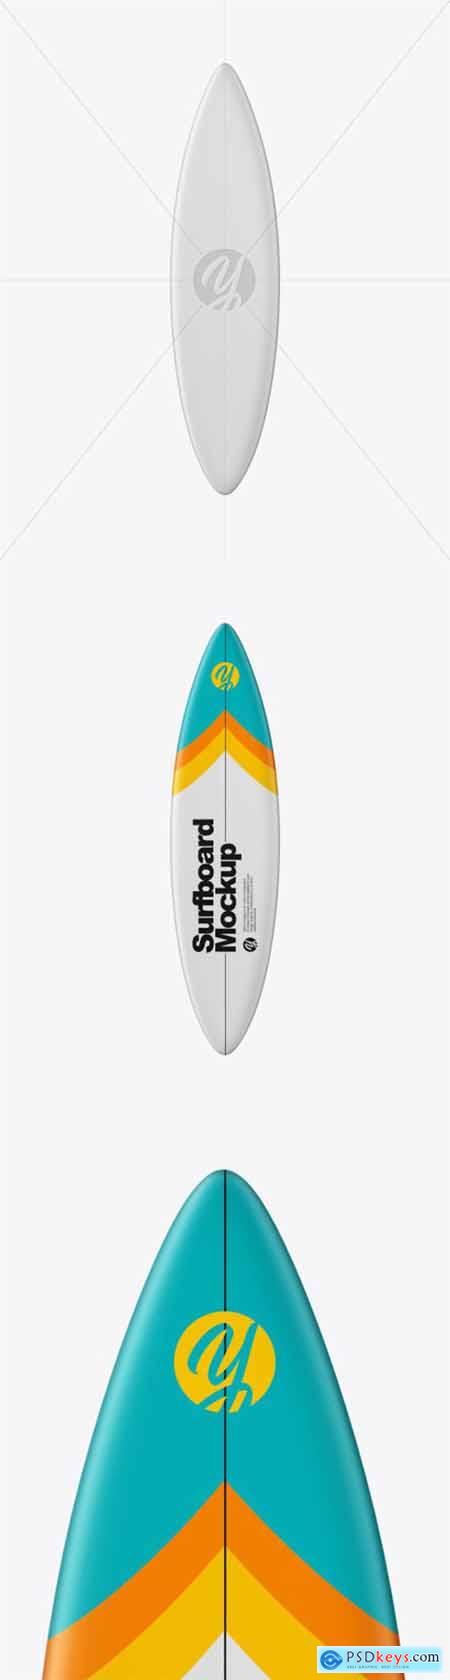 Surfboard Mockup - Front View 51856